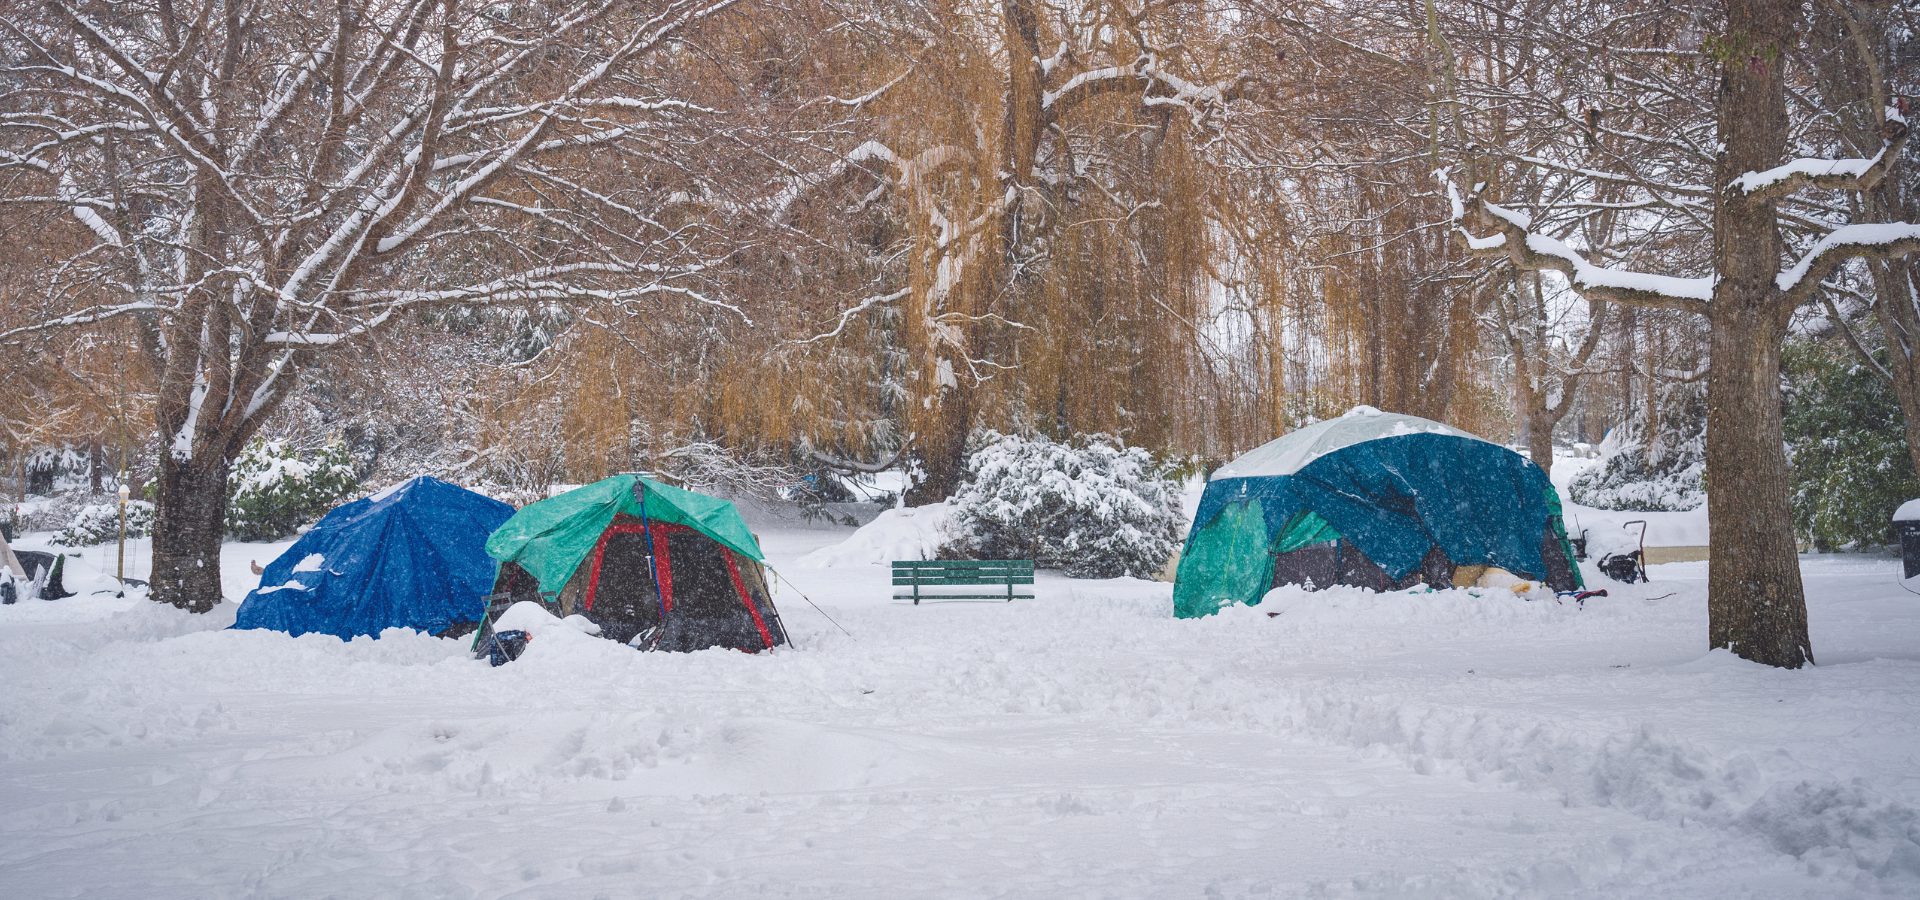 Image of tents in the snow.